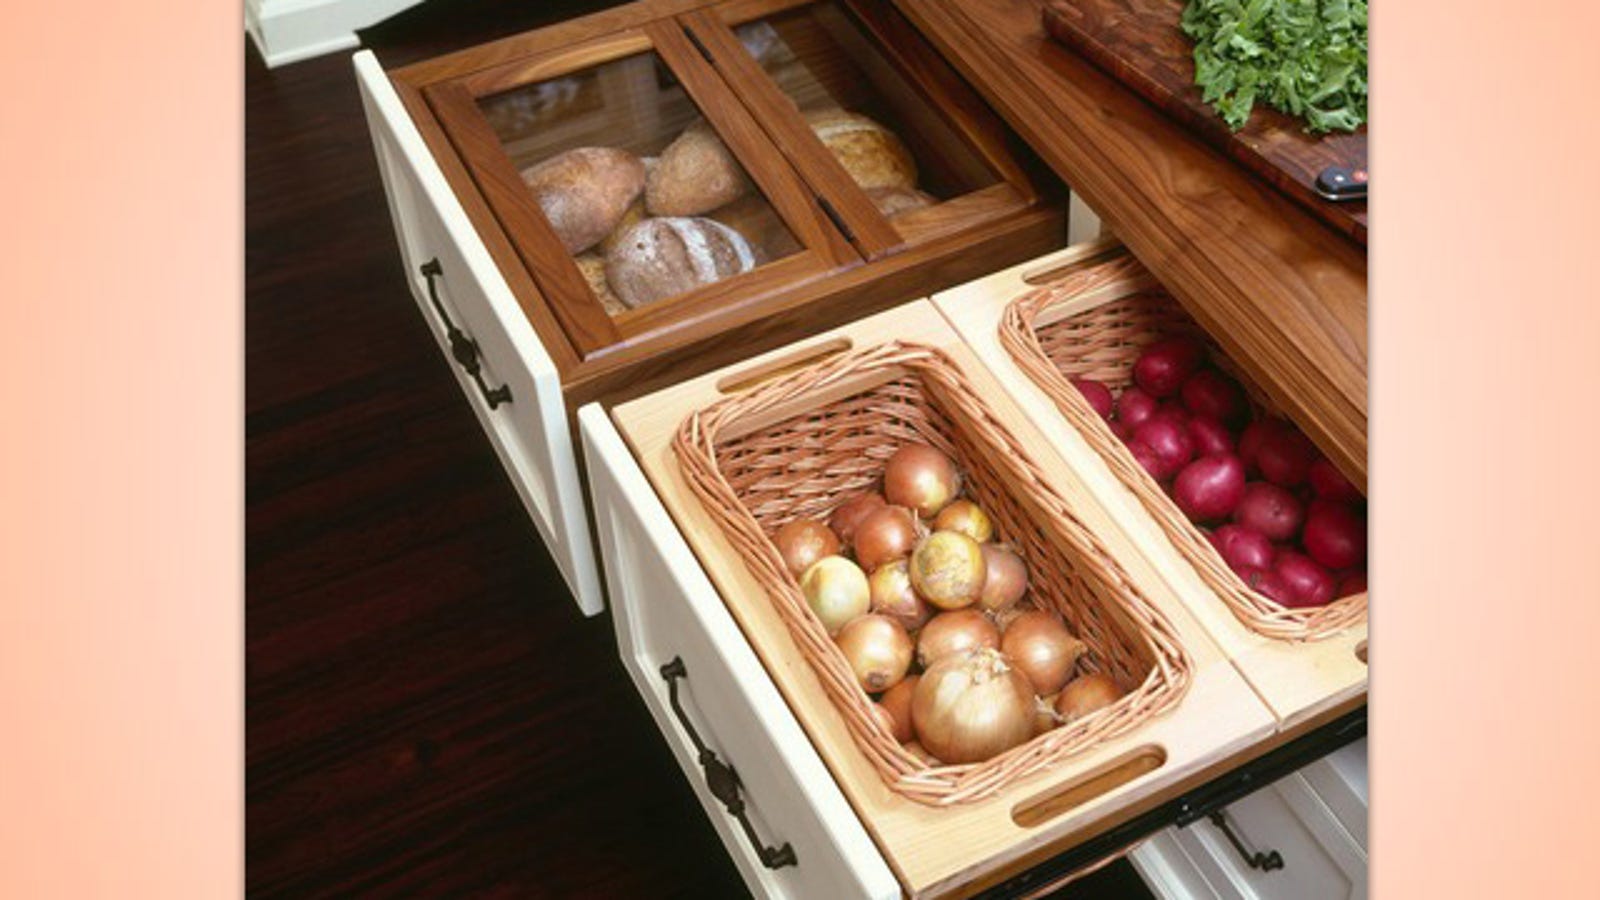 DIY Drawers Store Onions, Bread, and Other Food Out of Sight